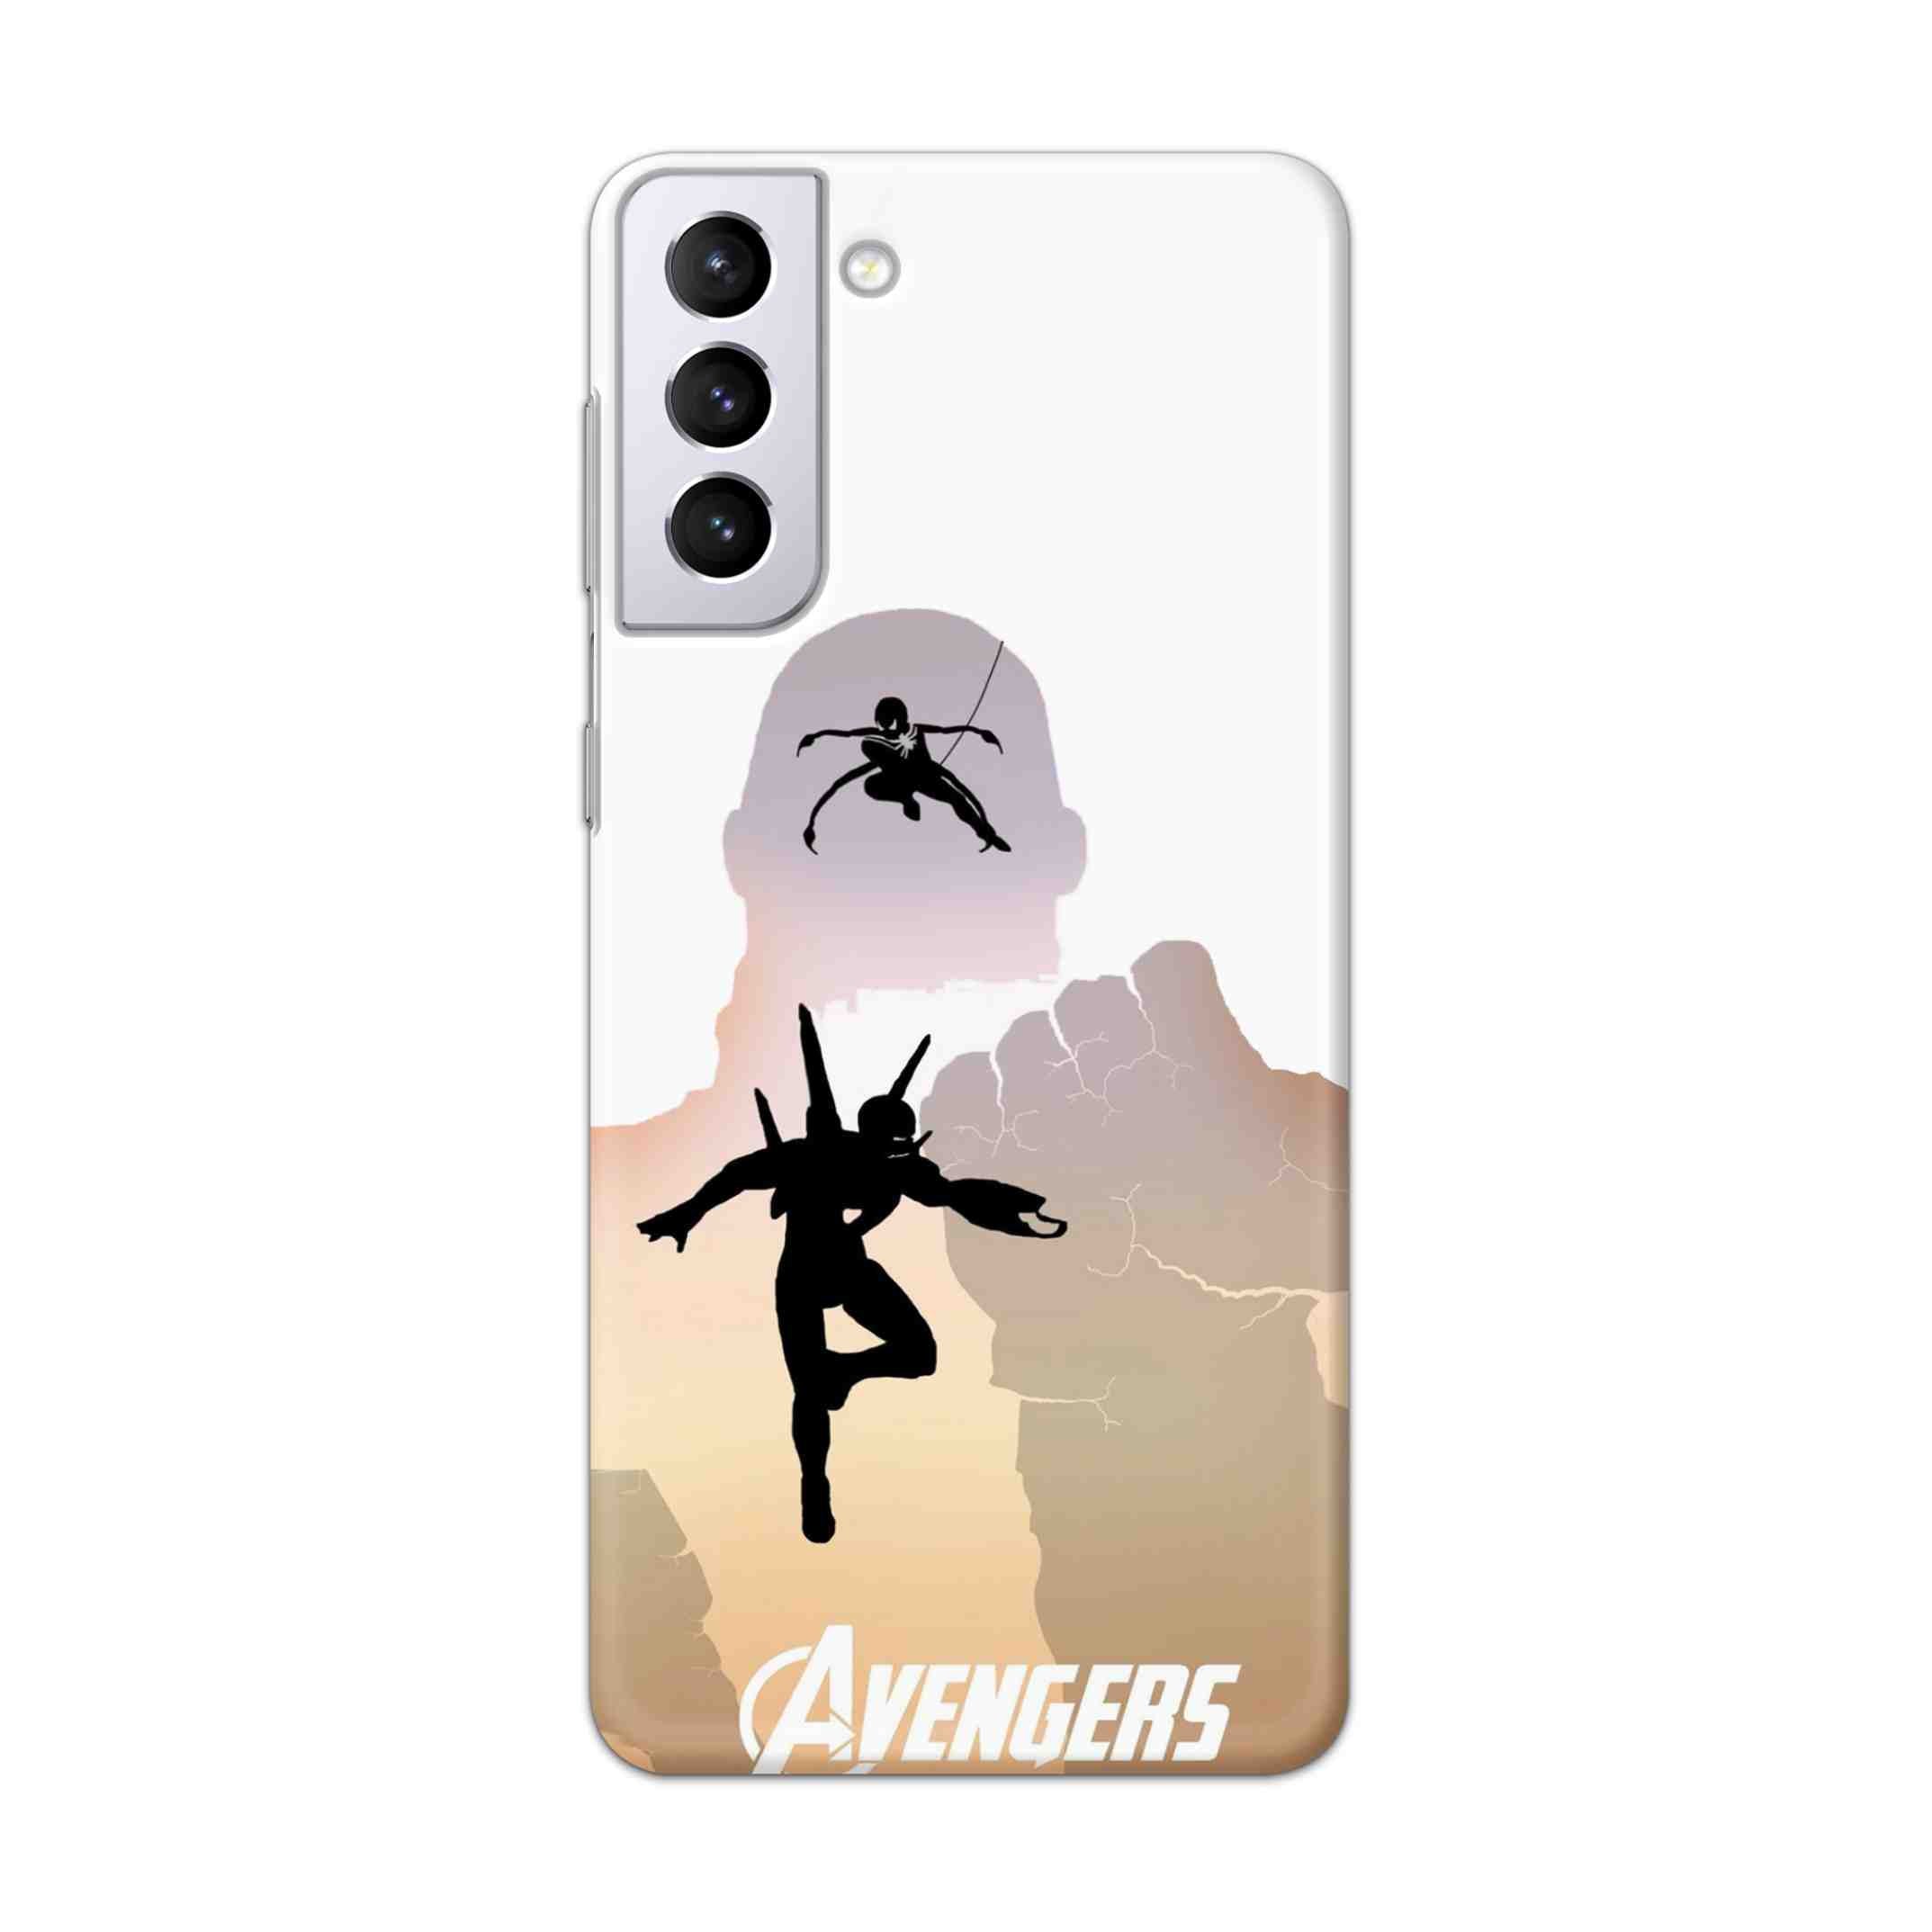 Buy Iron Man Vs Spiderman Hard Back Mobile Phone Case Cover For Samsung Galaxy S21 Online